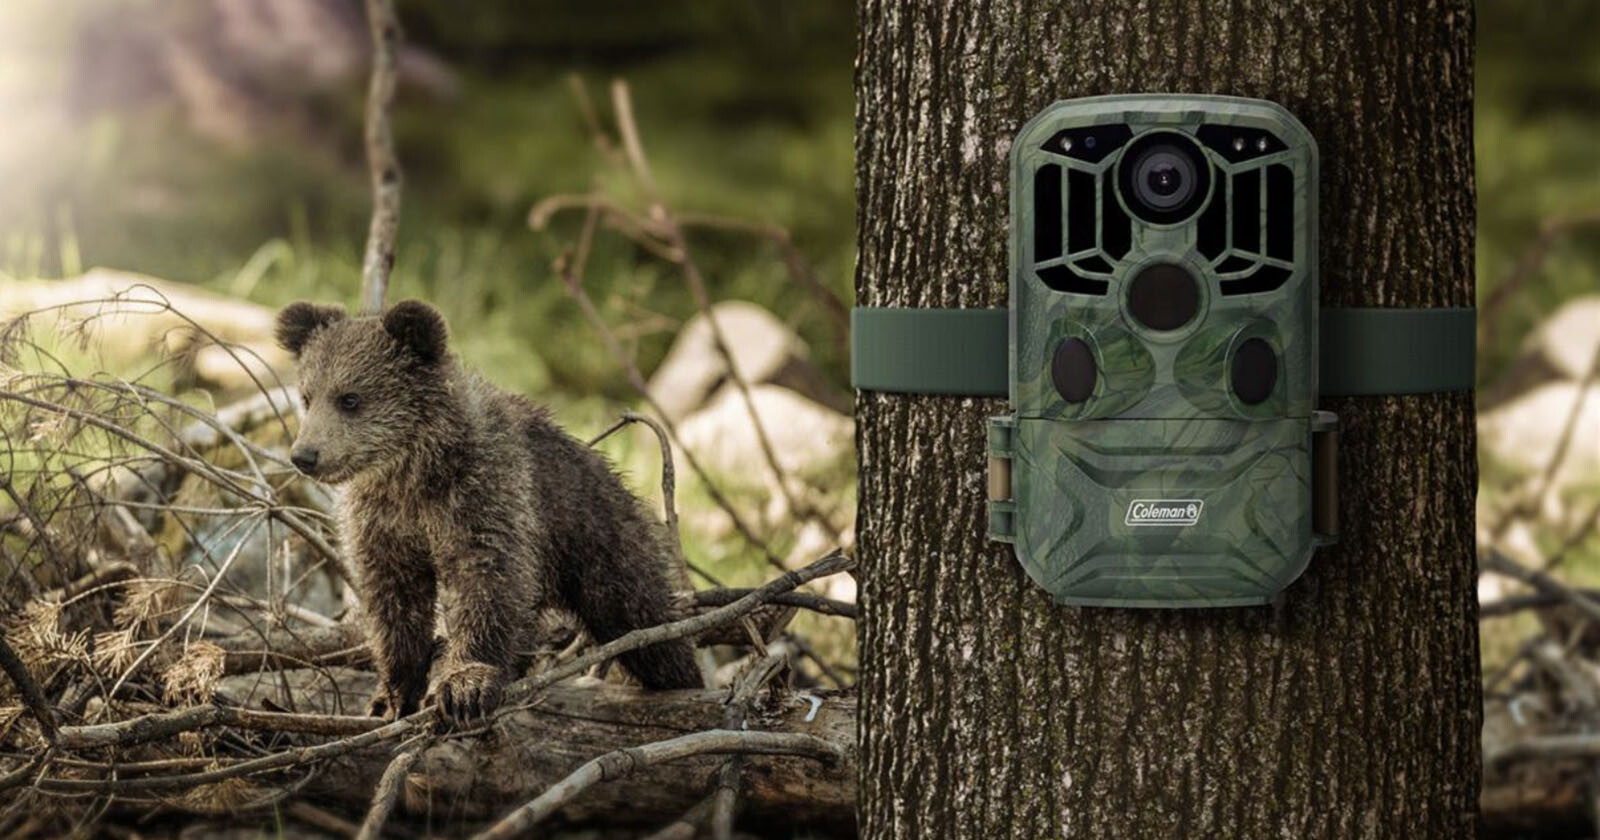  lets anyone mount game cameras private land without 